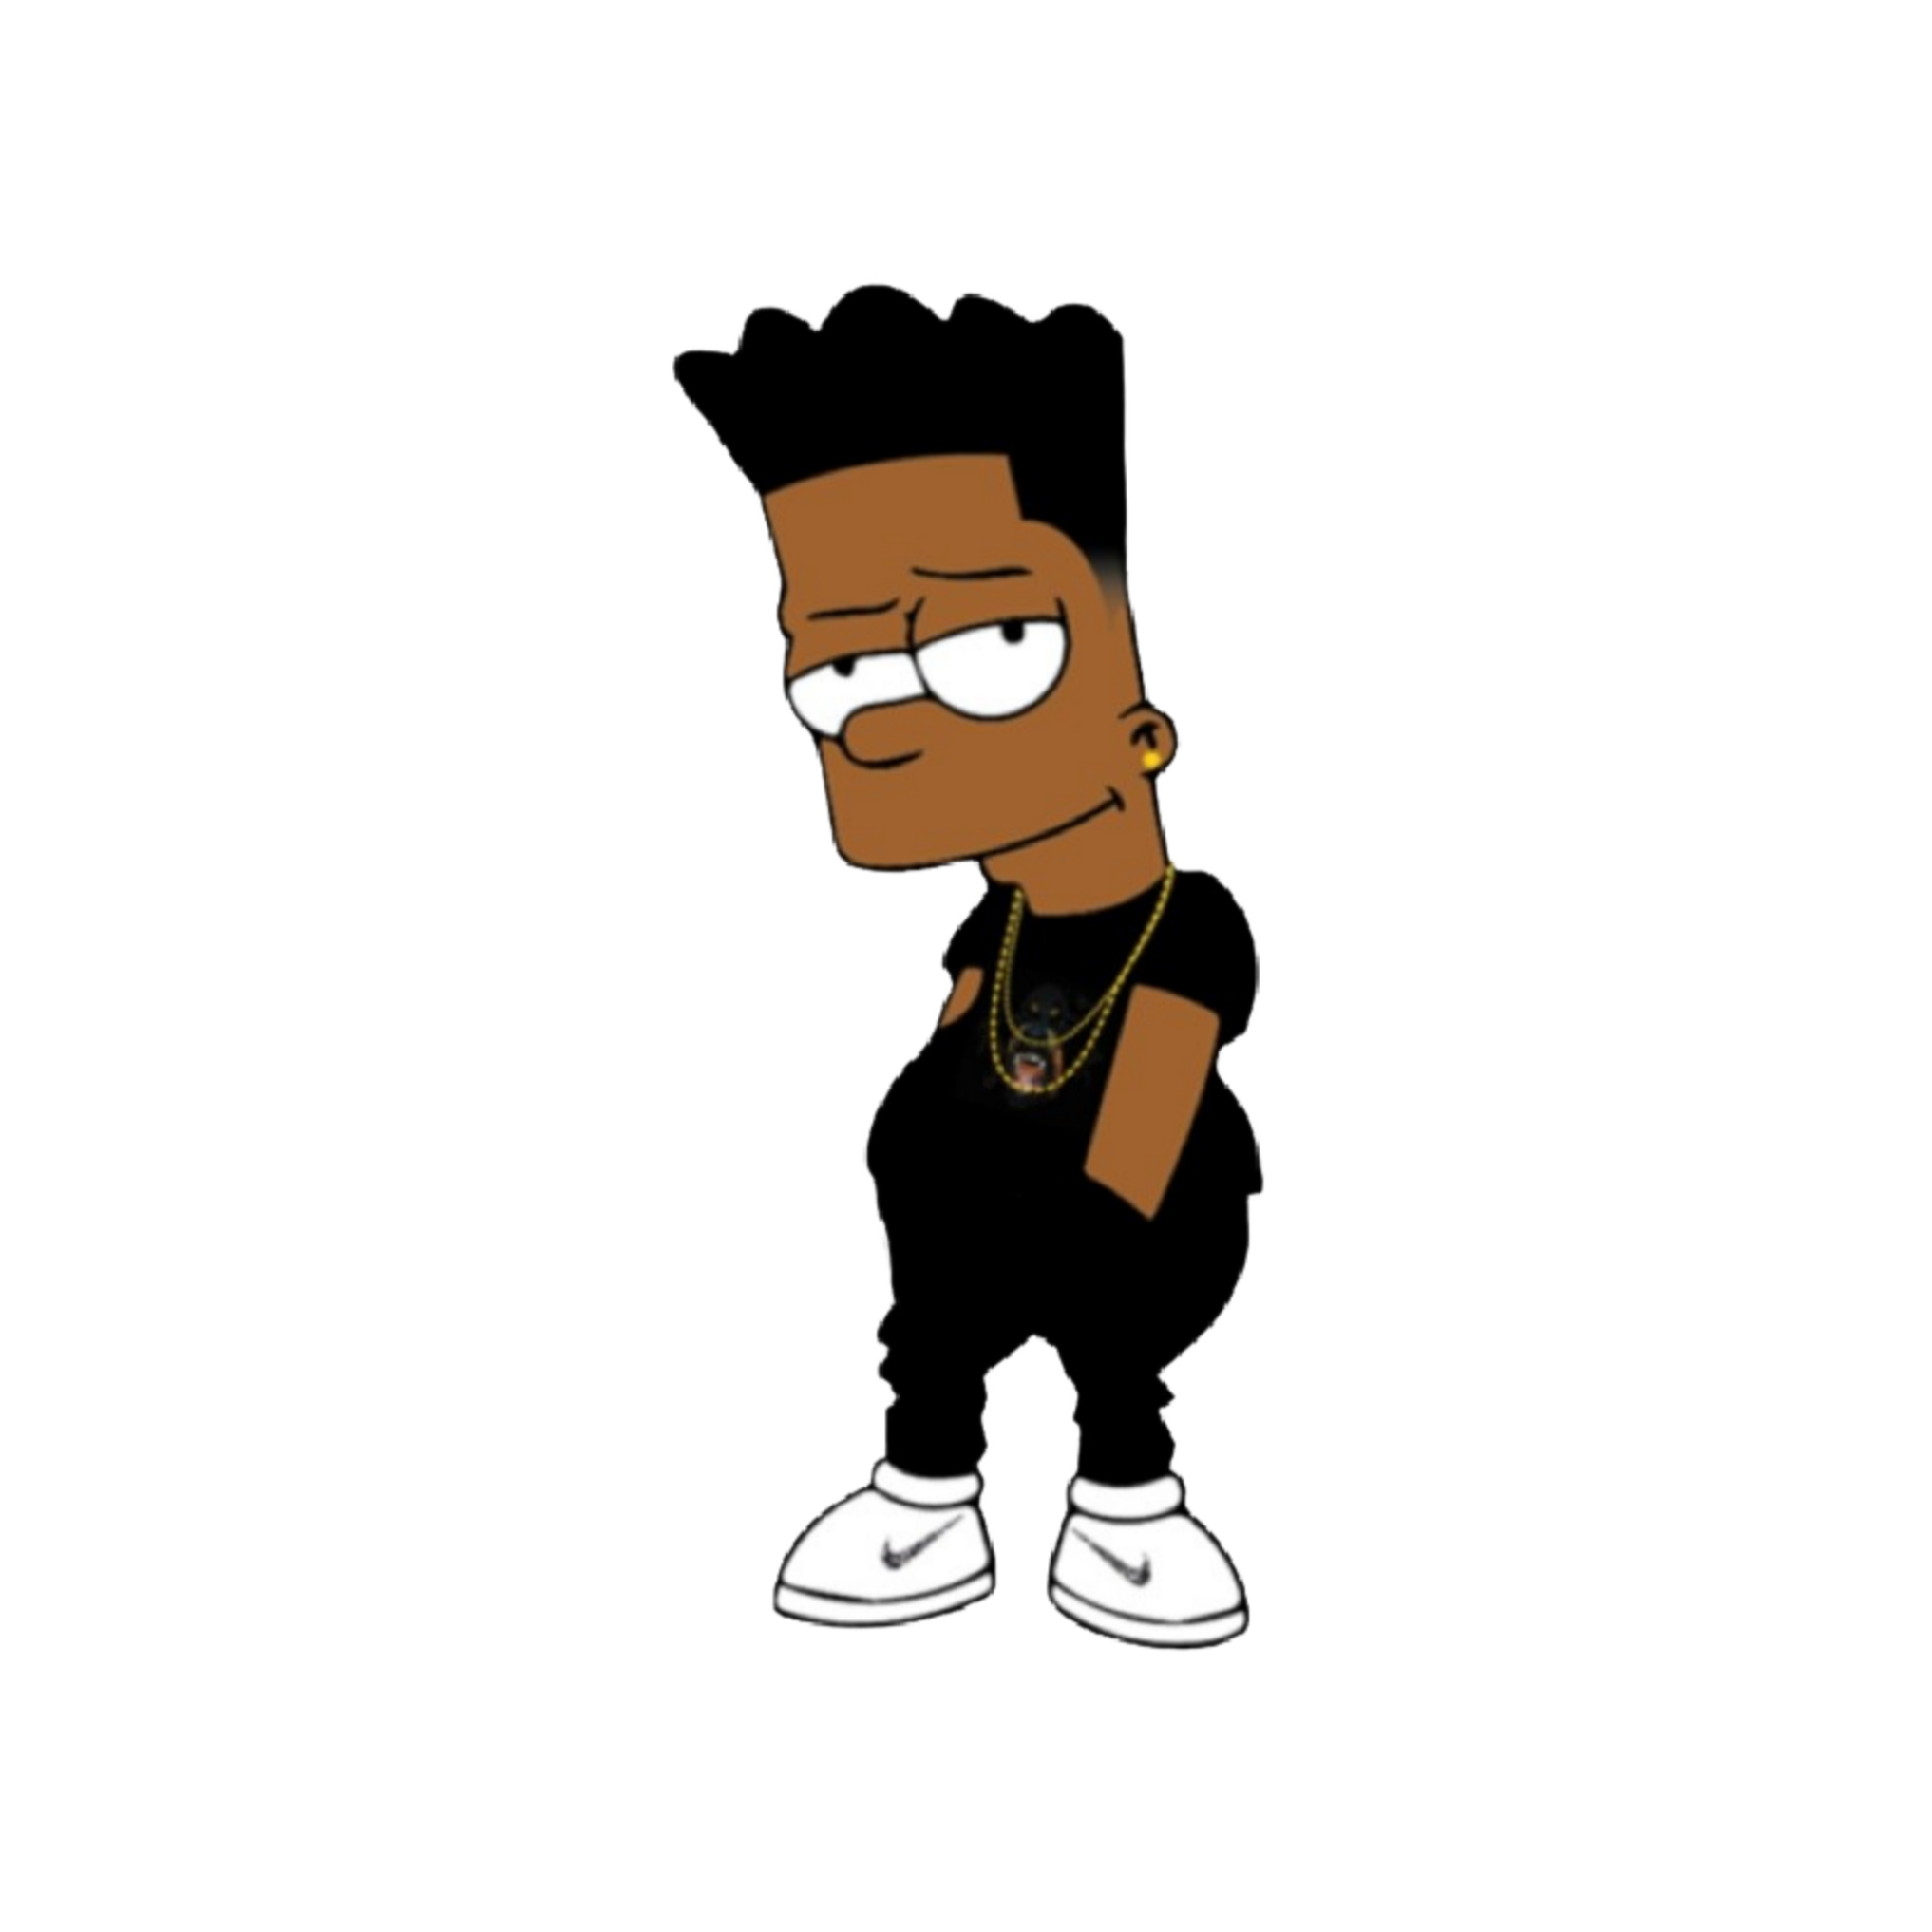 simpson freetoedit #simpson sticker by @amazing images2020.